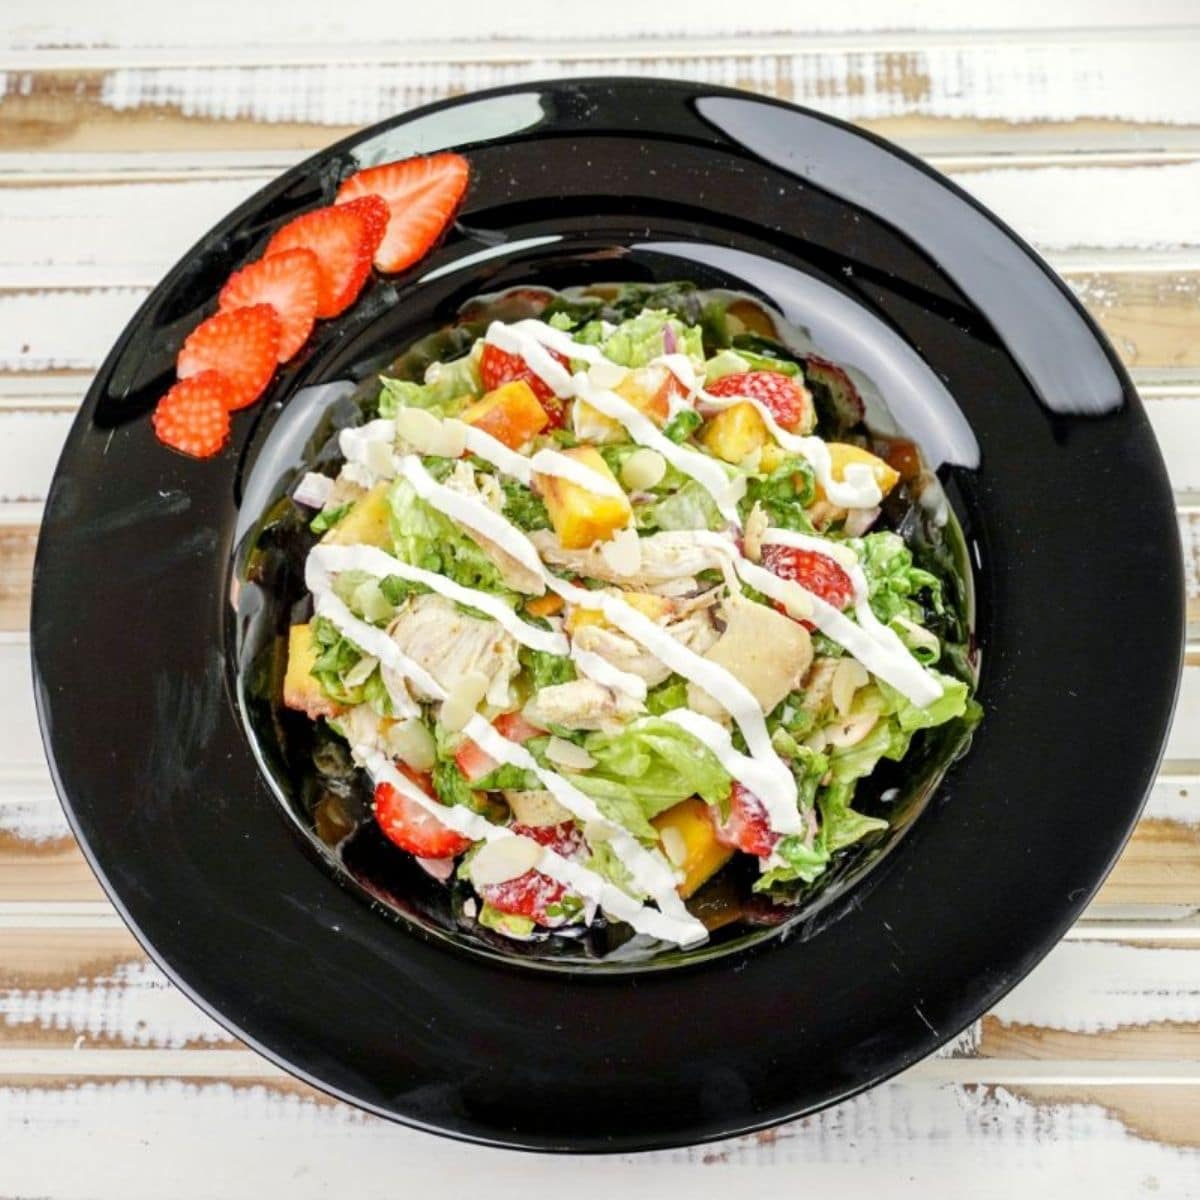 round black plate with salad and strawberries on wood table